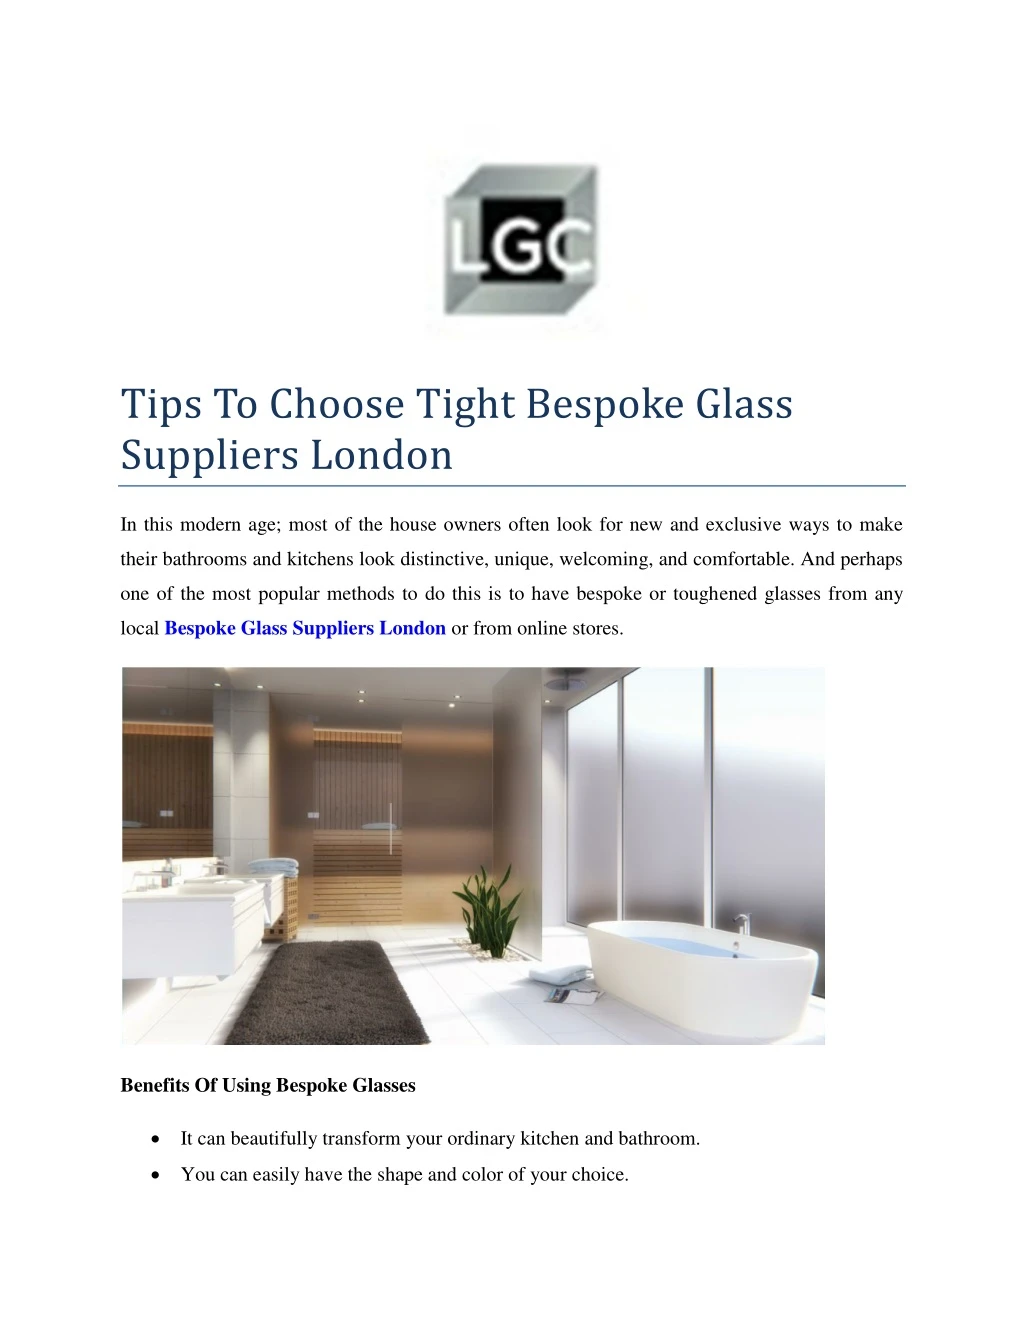 tips to choose tight bespoke glass suppliers